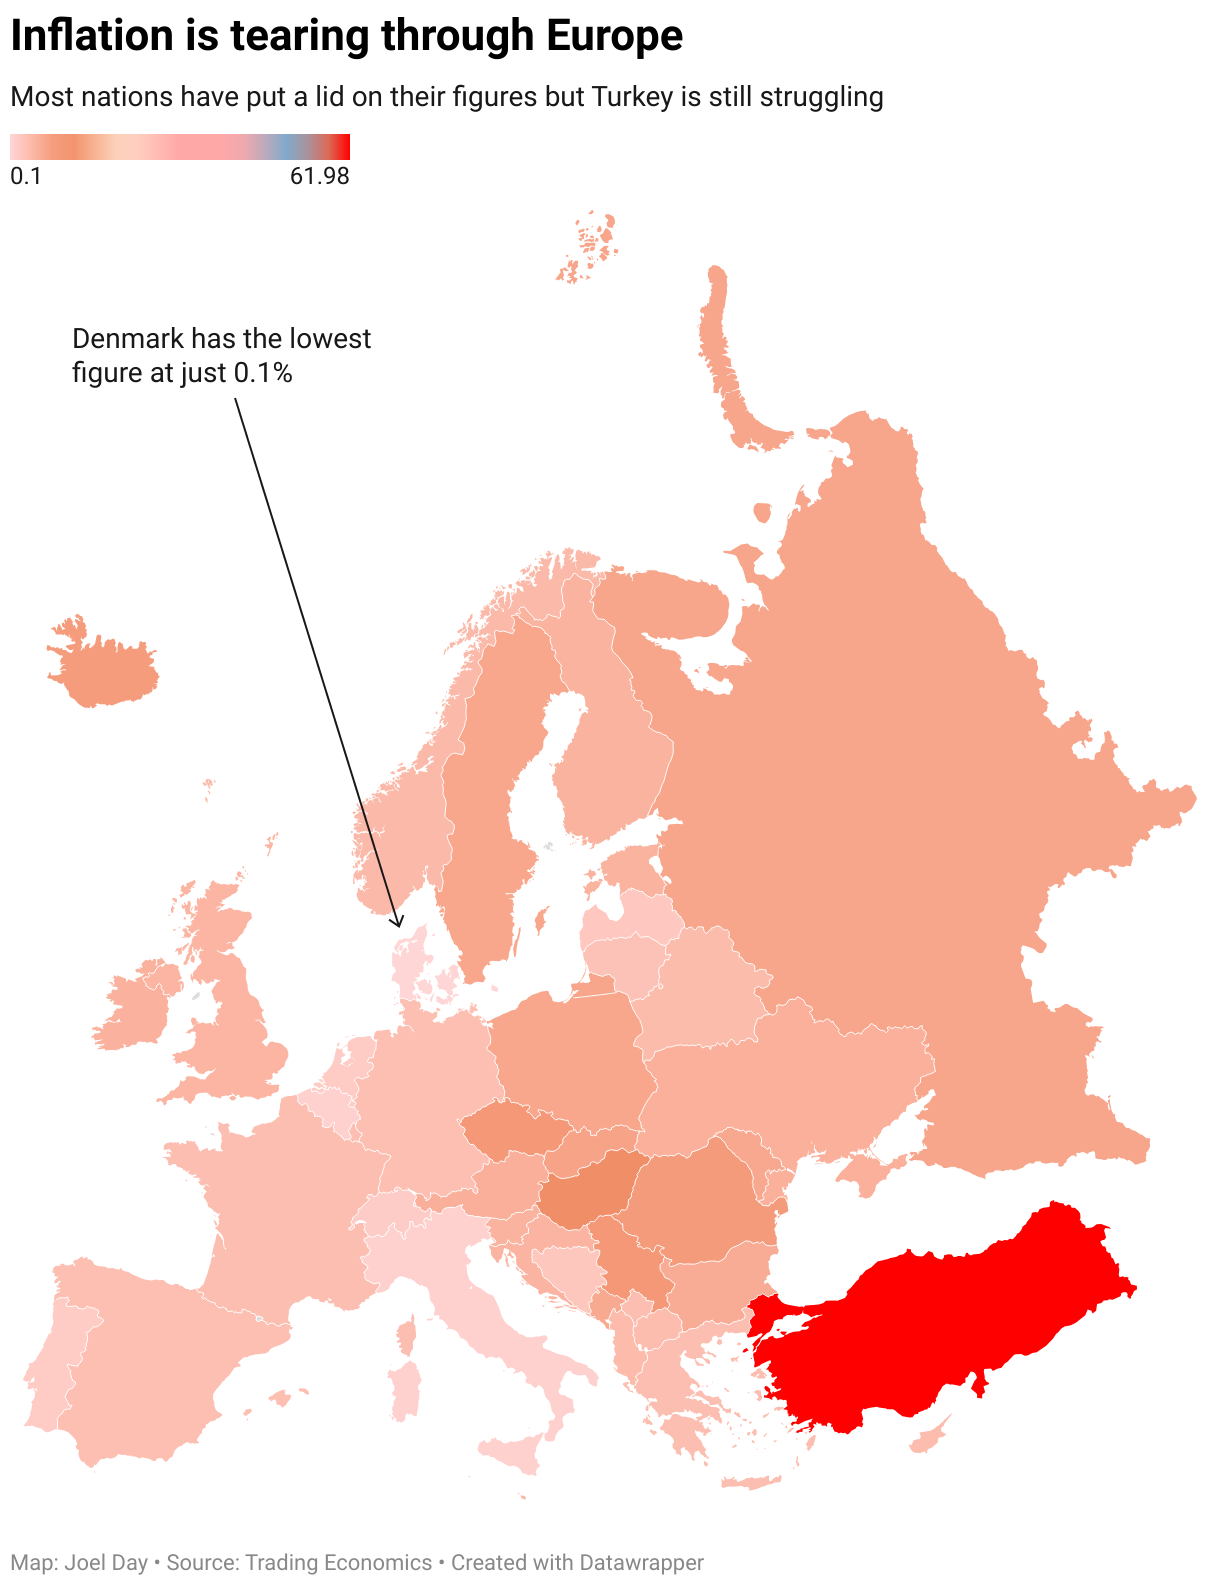 The map shows inflation rates across Europe, with Turkey's high of 62 percent. 